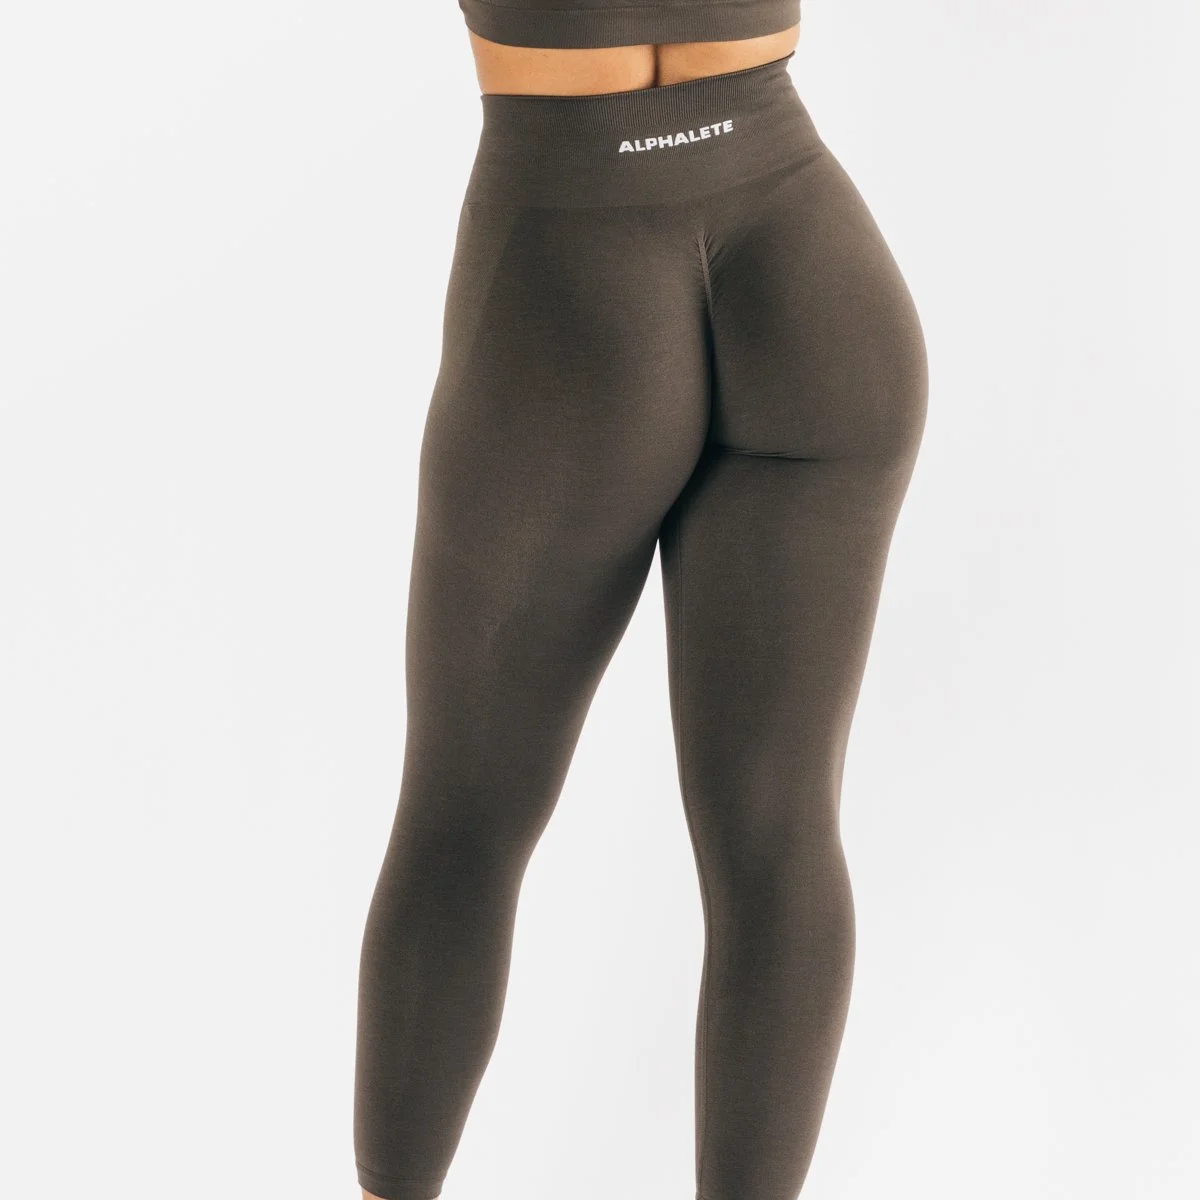 Activewear Gym Tights Leggings Free Size